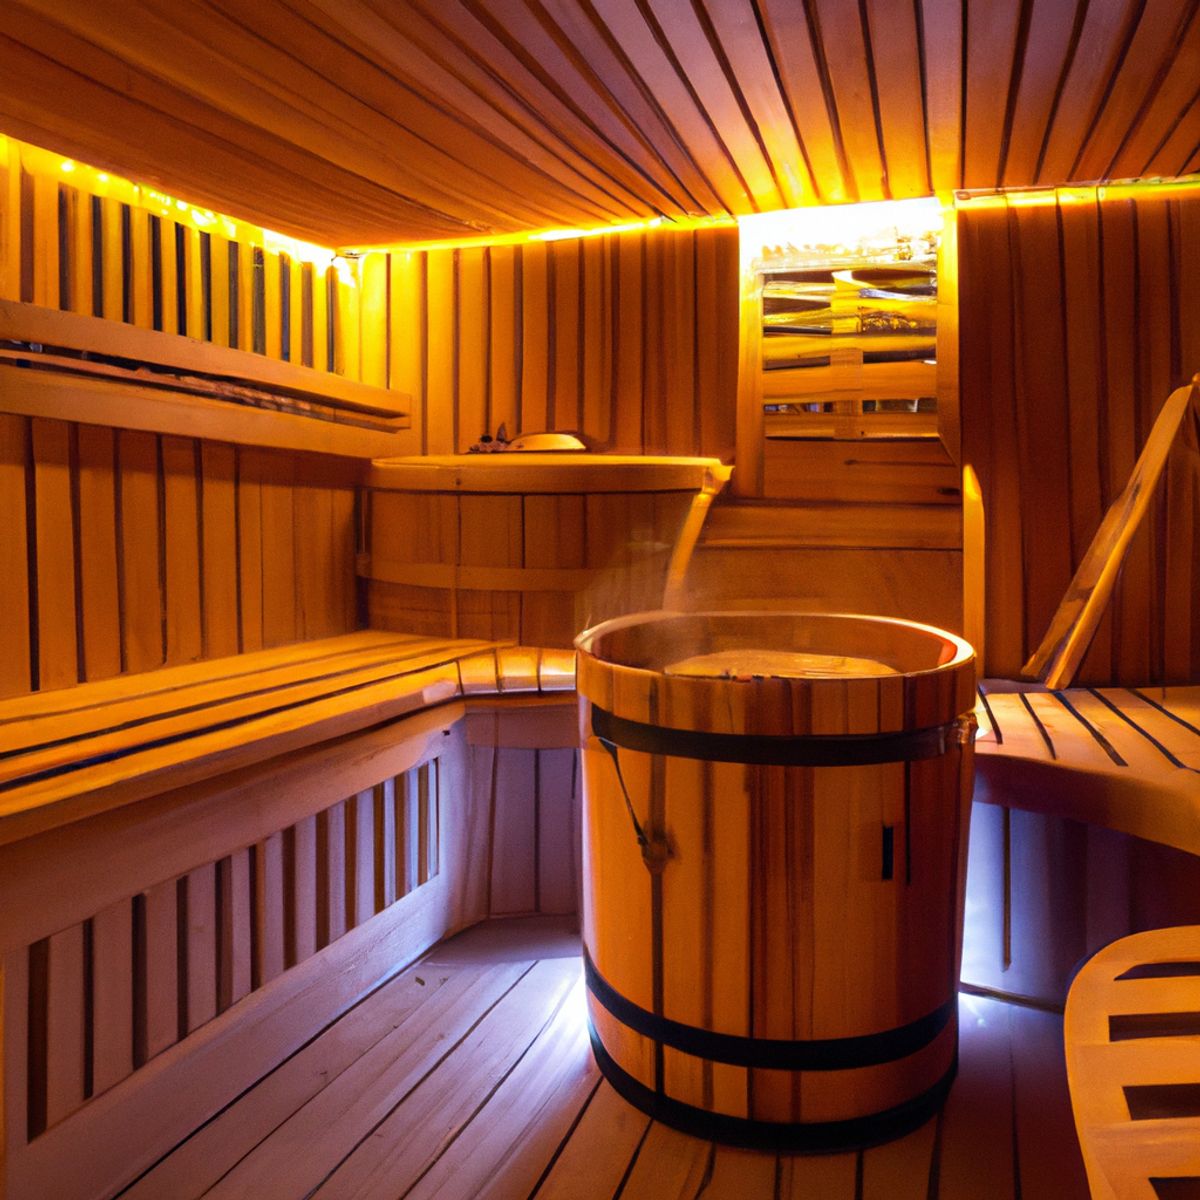 Top One & Two-Person Saunas: Find Your Perfect Barrel Sauna